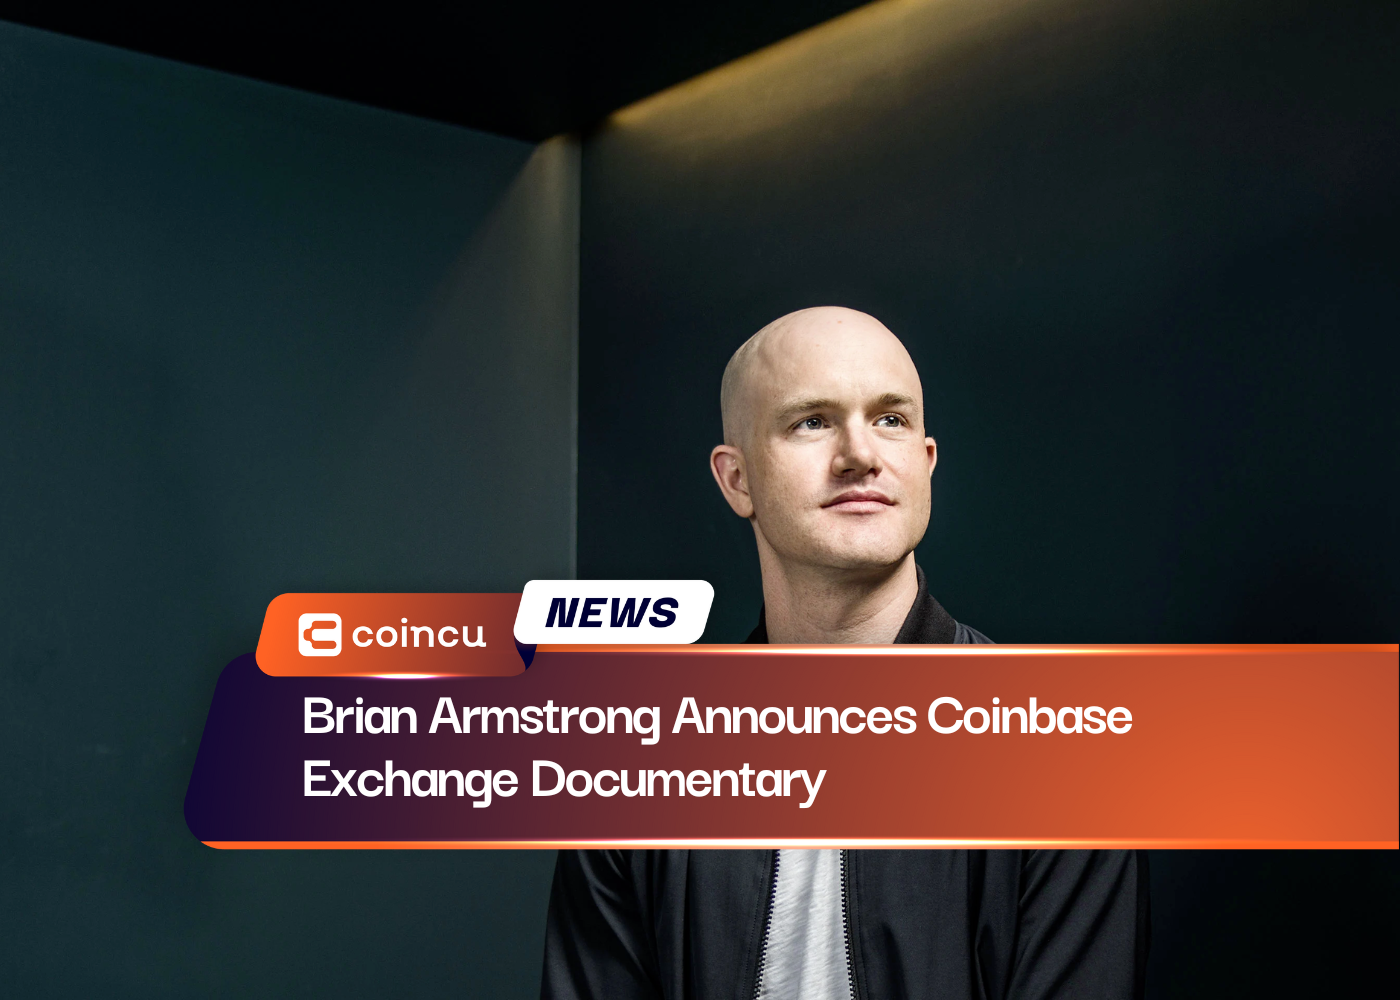 Brian Armstrong Announces Coinbase Exchange Documentary